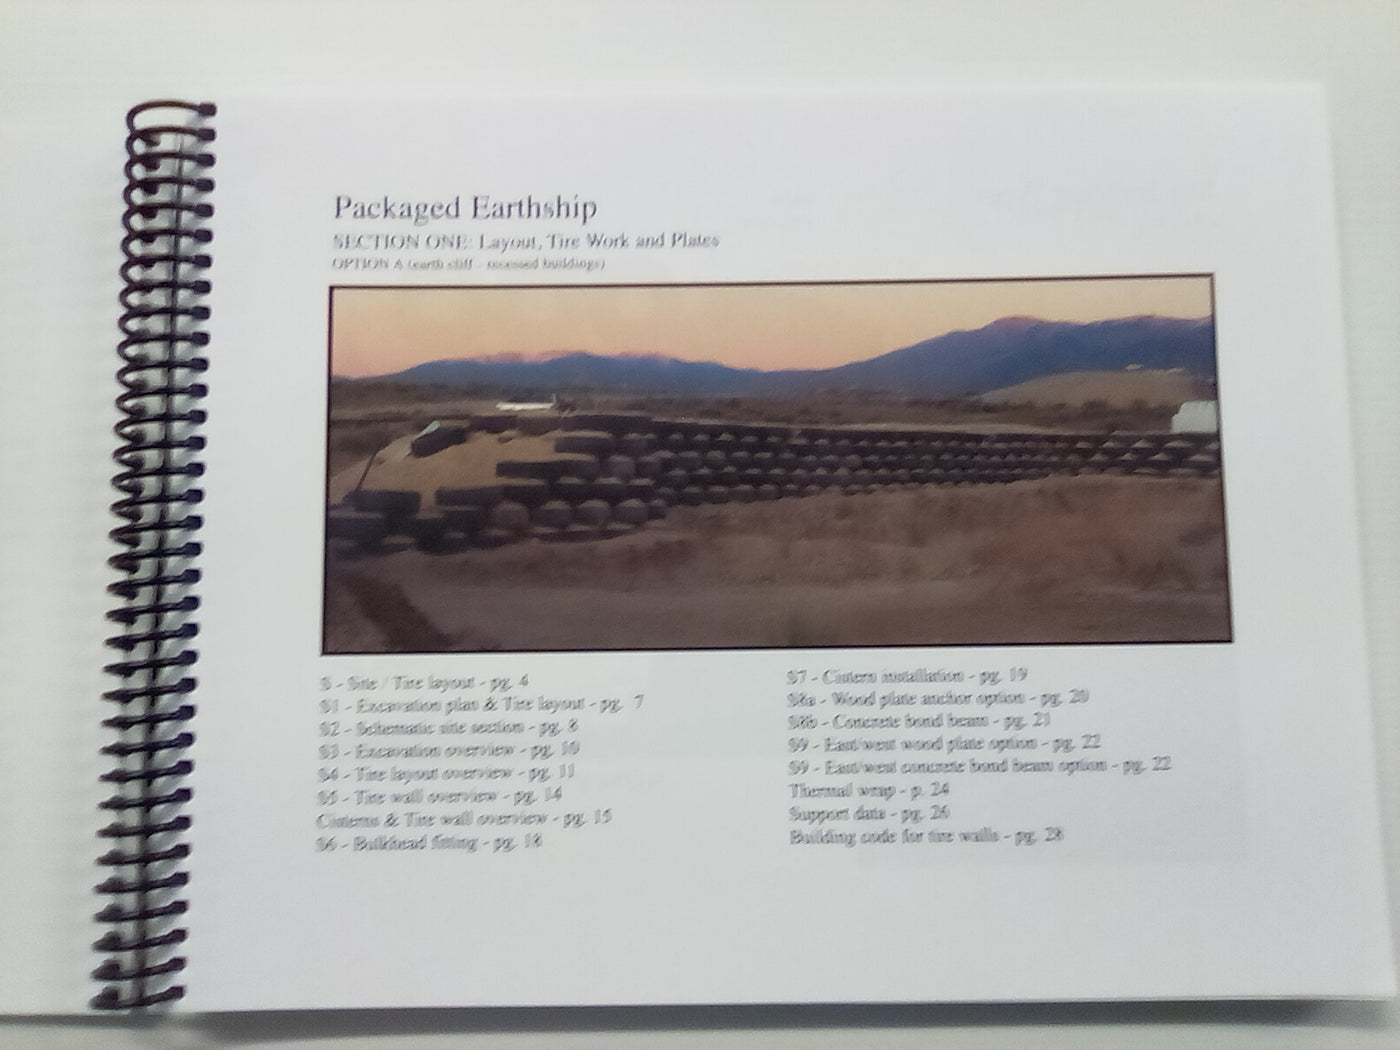 Packaged Detail Book (Sustainable Housing) With Plan Options by Earthship Biotecture